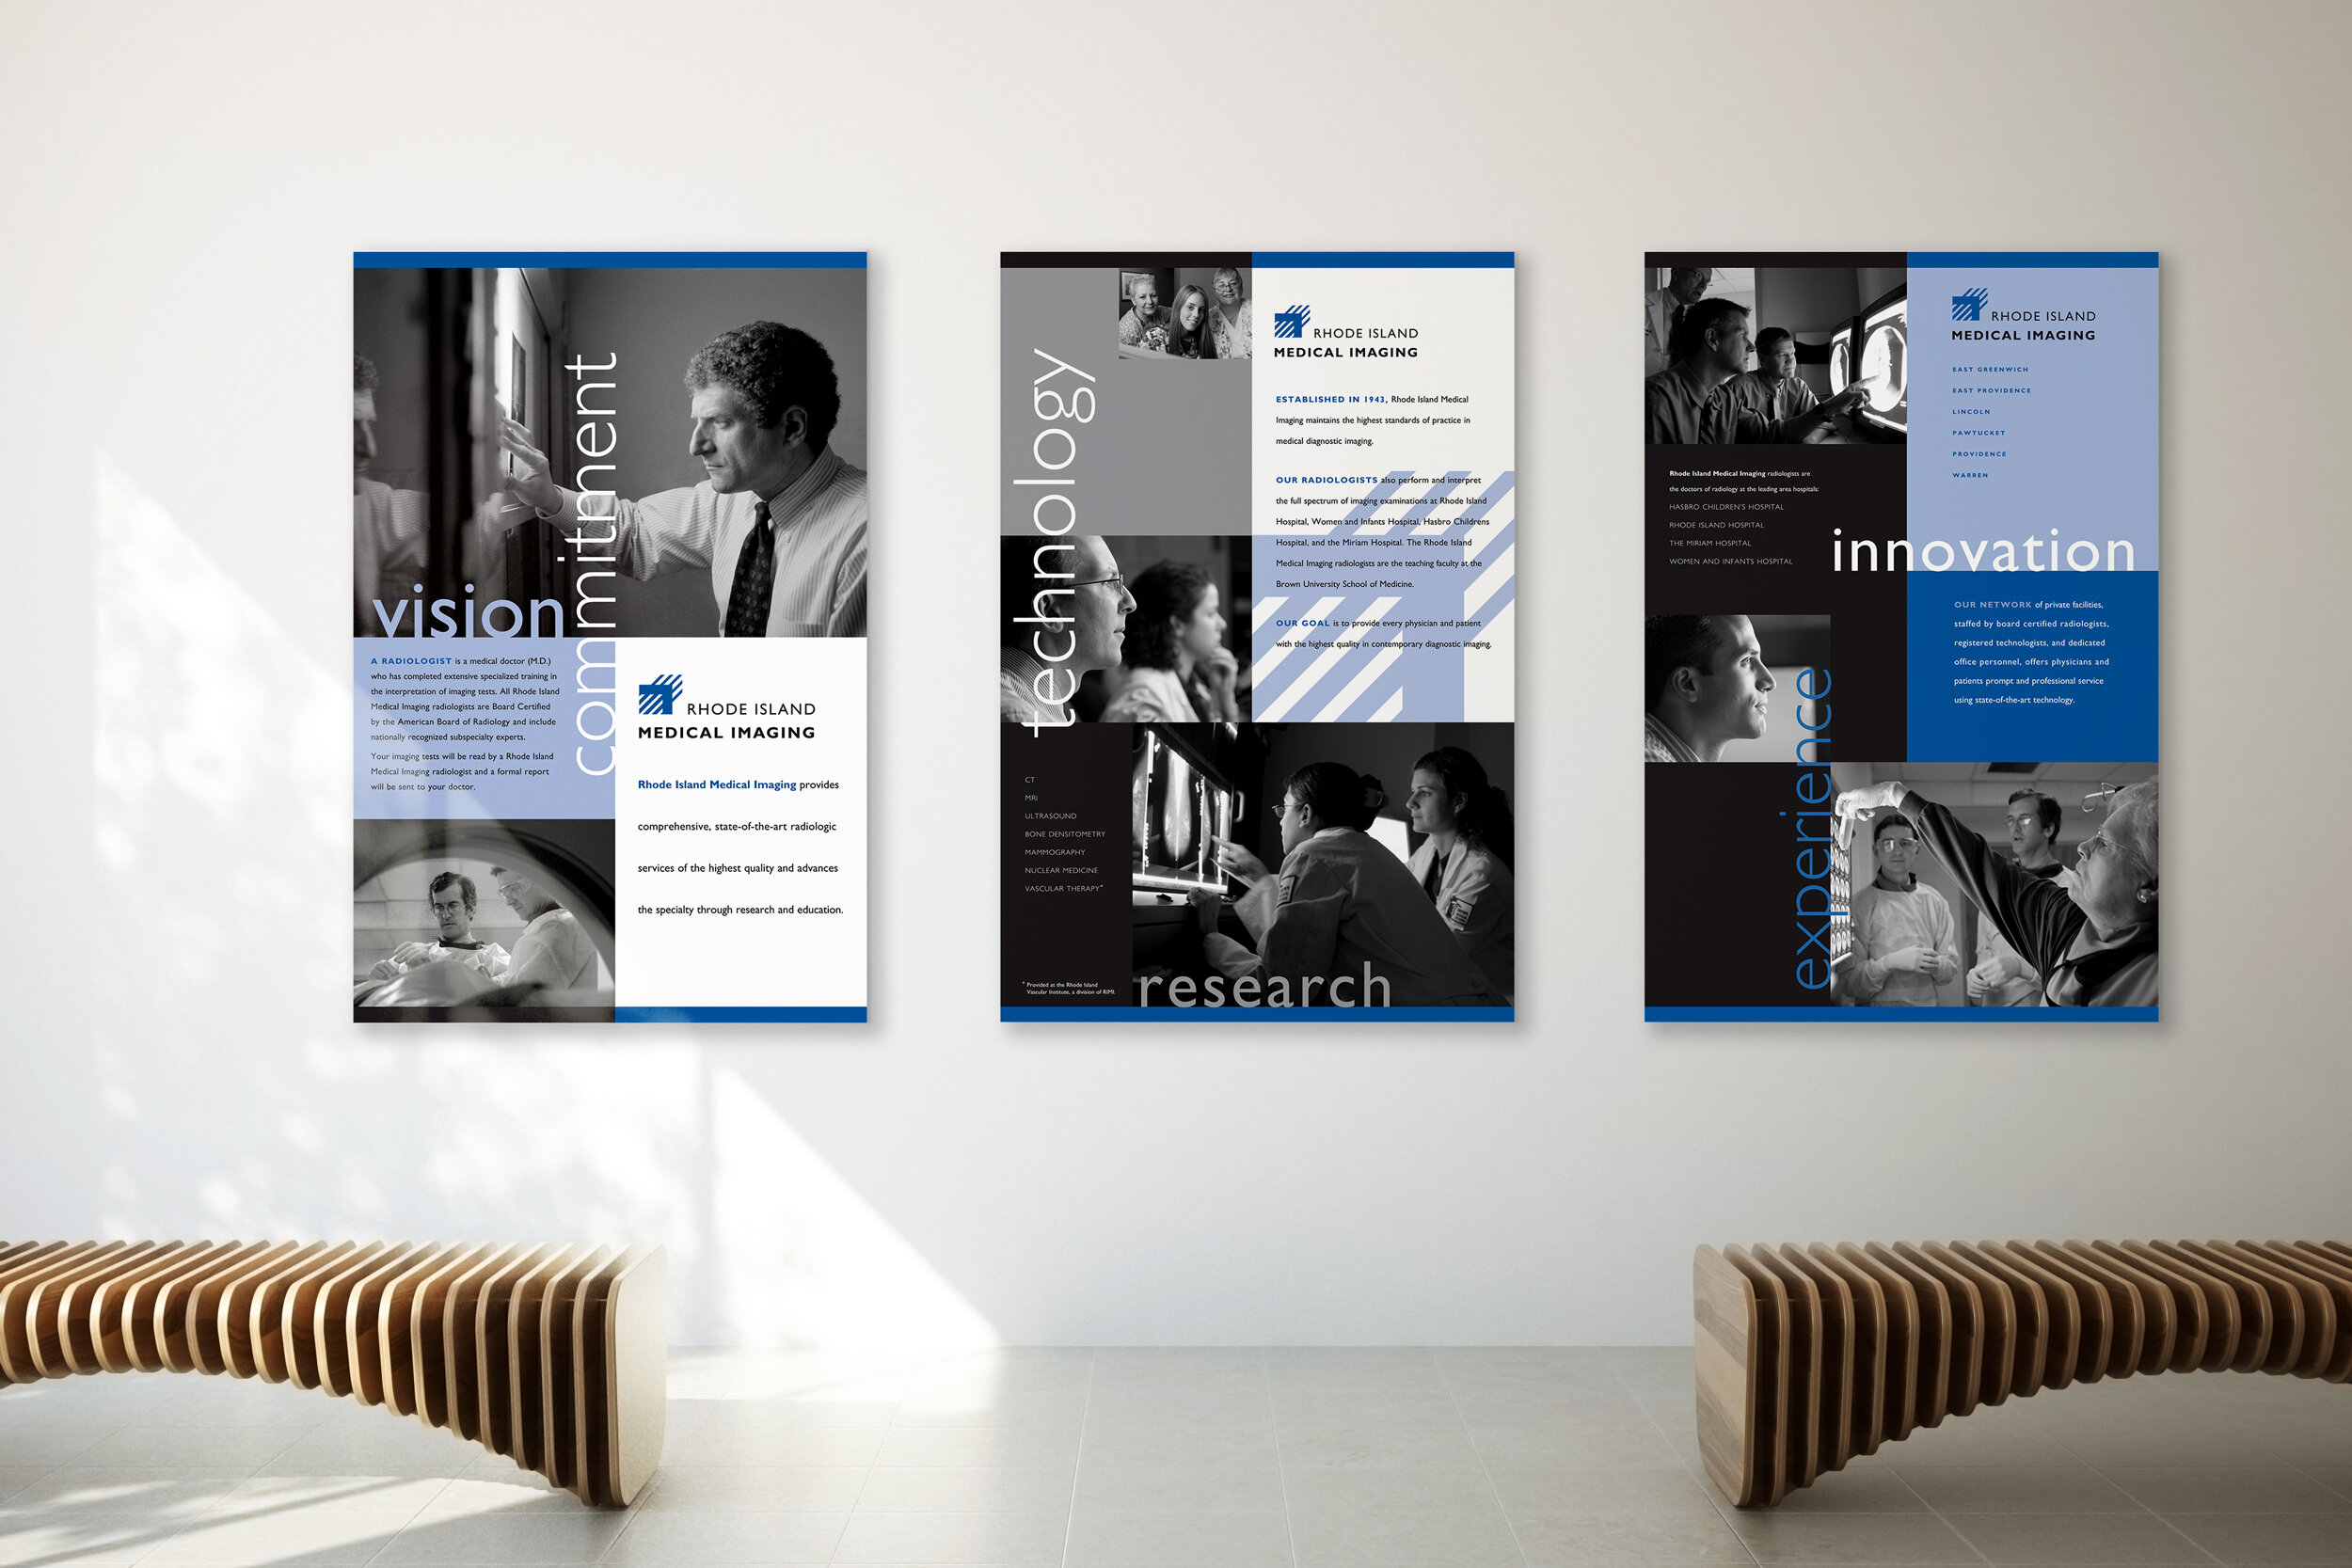   promotional image boards  • designer: Michael Balint • copy and direction: Acadia Consulting Group 